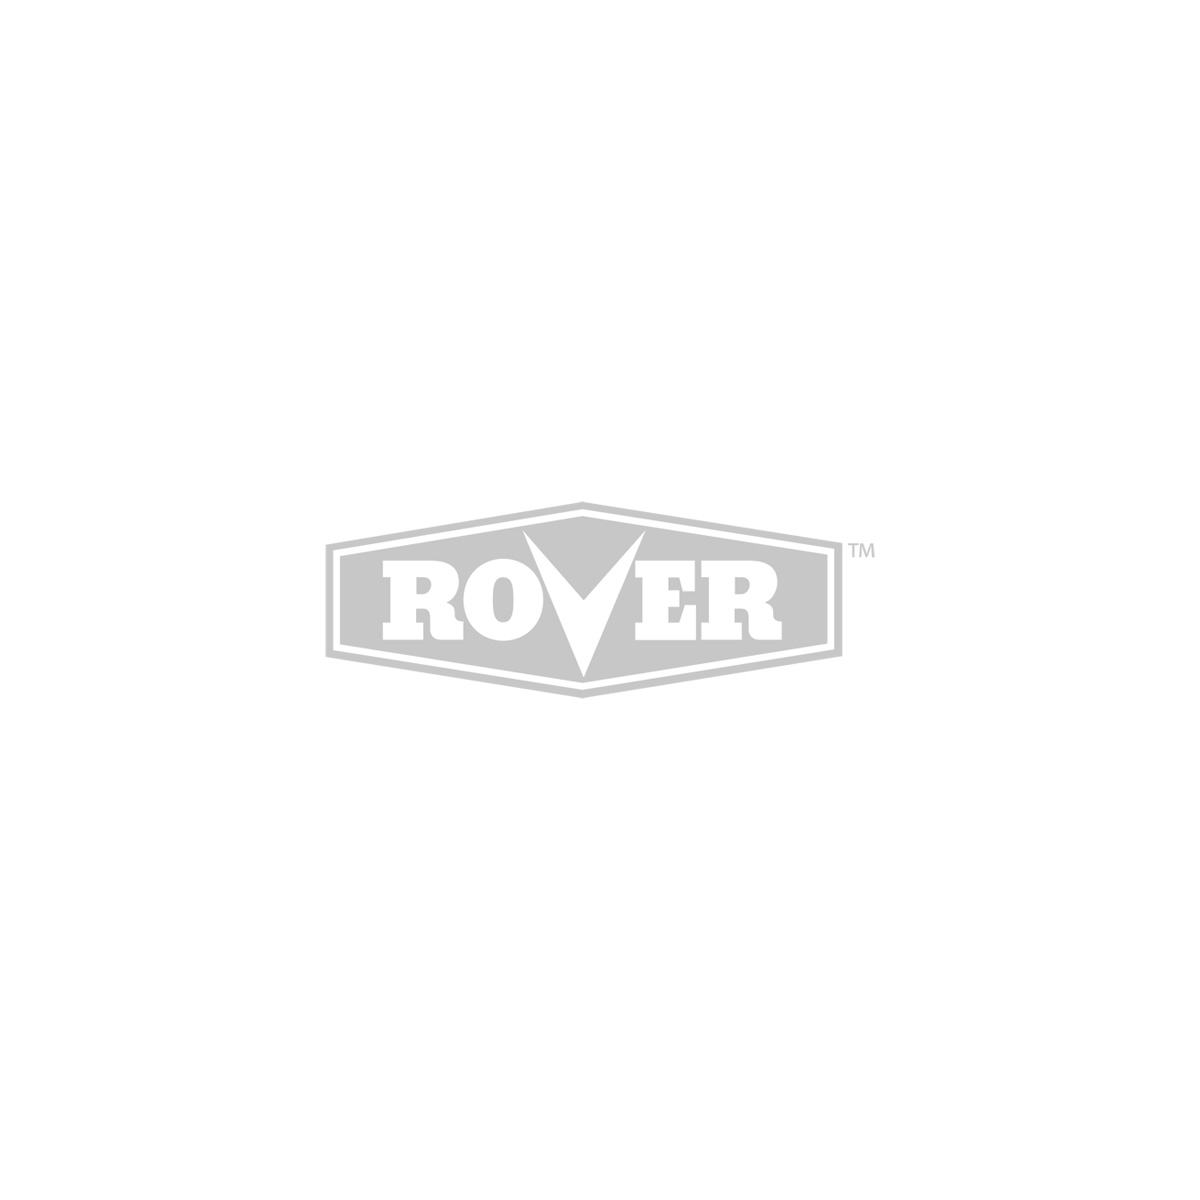 Fabric Catcher to Fit Rover Pro Cut Series